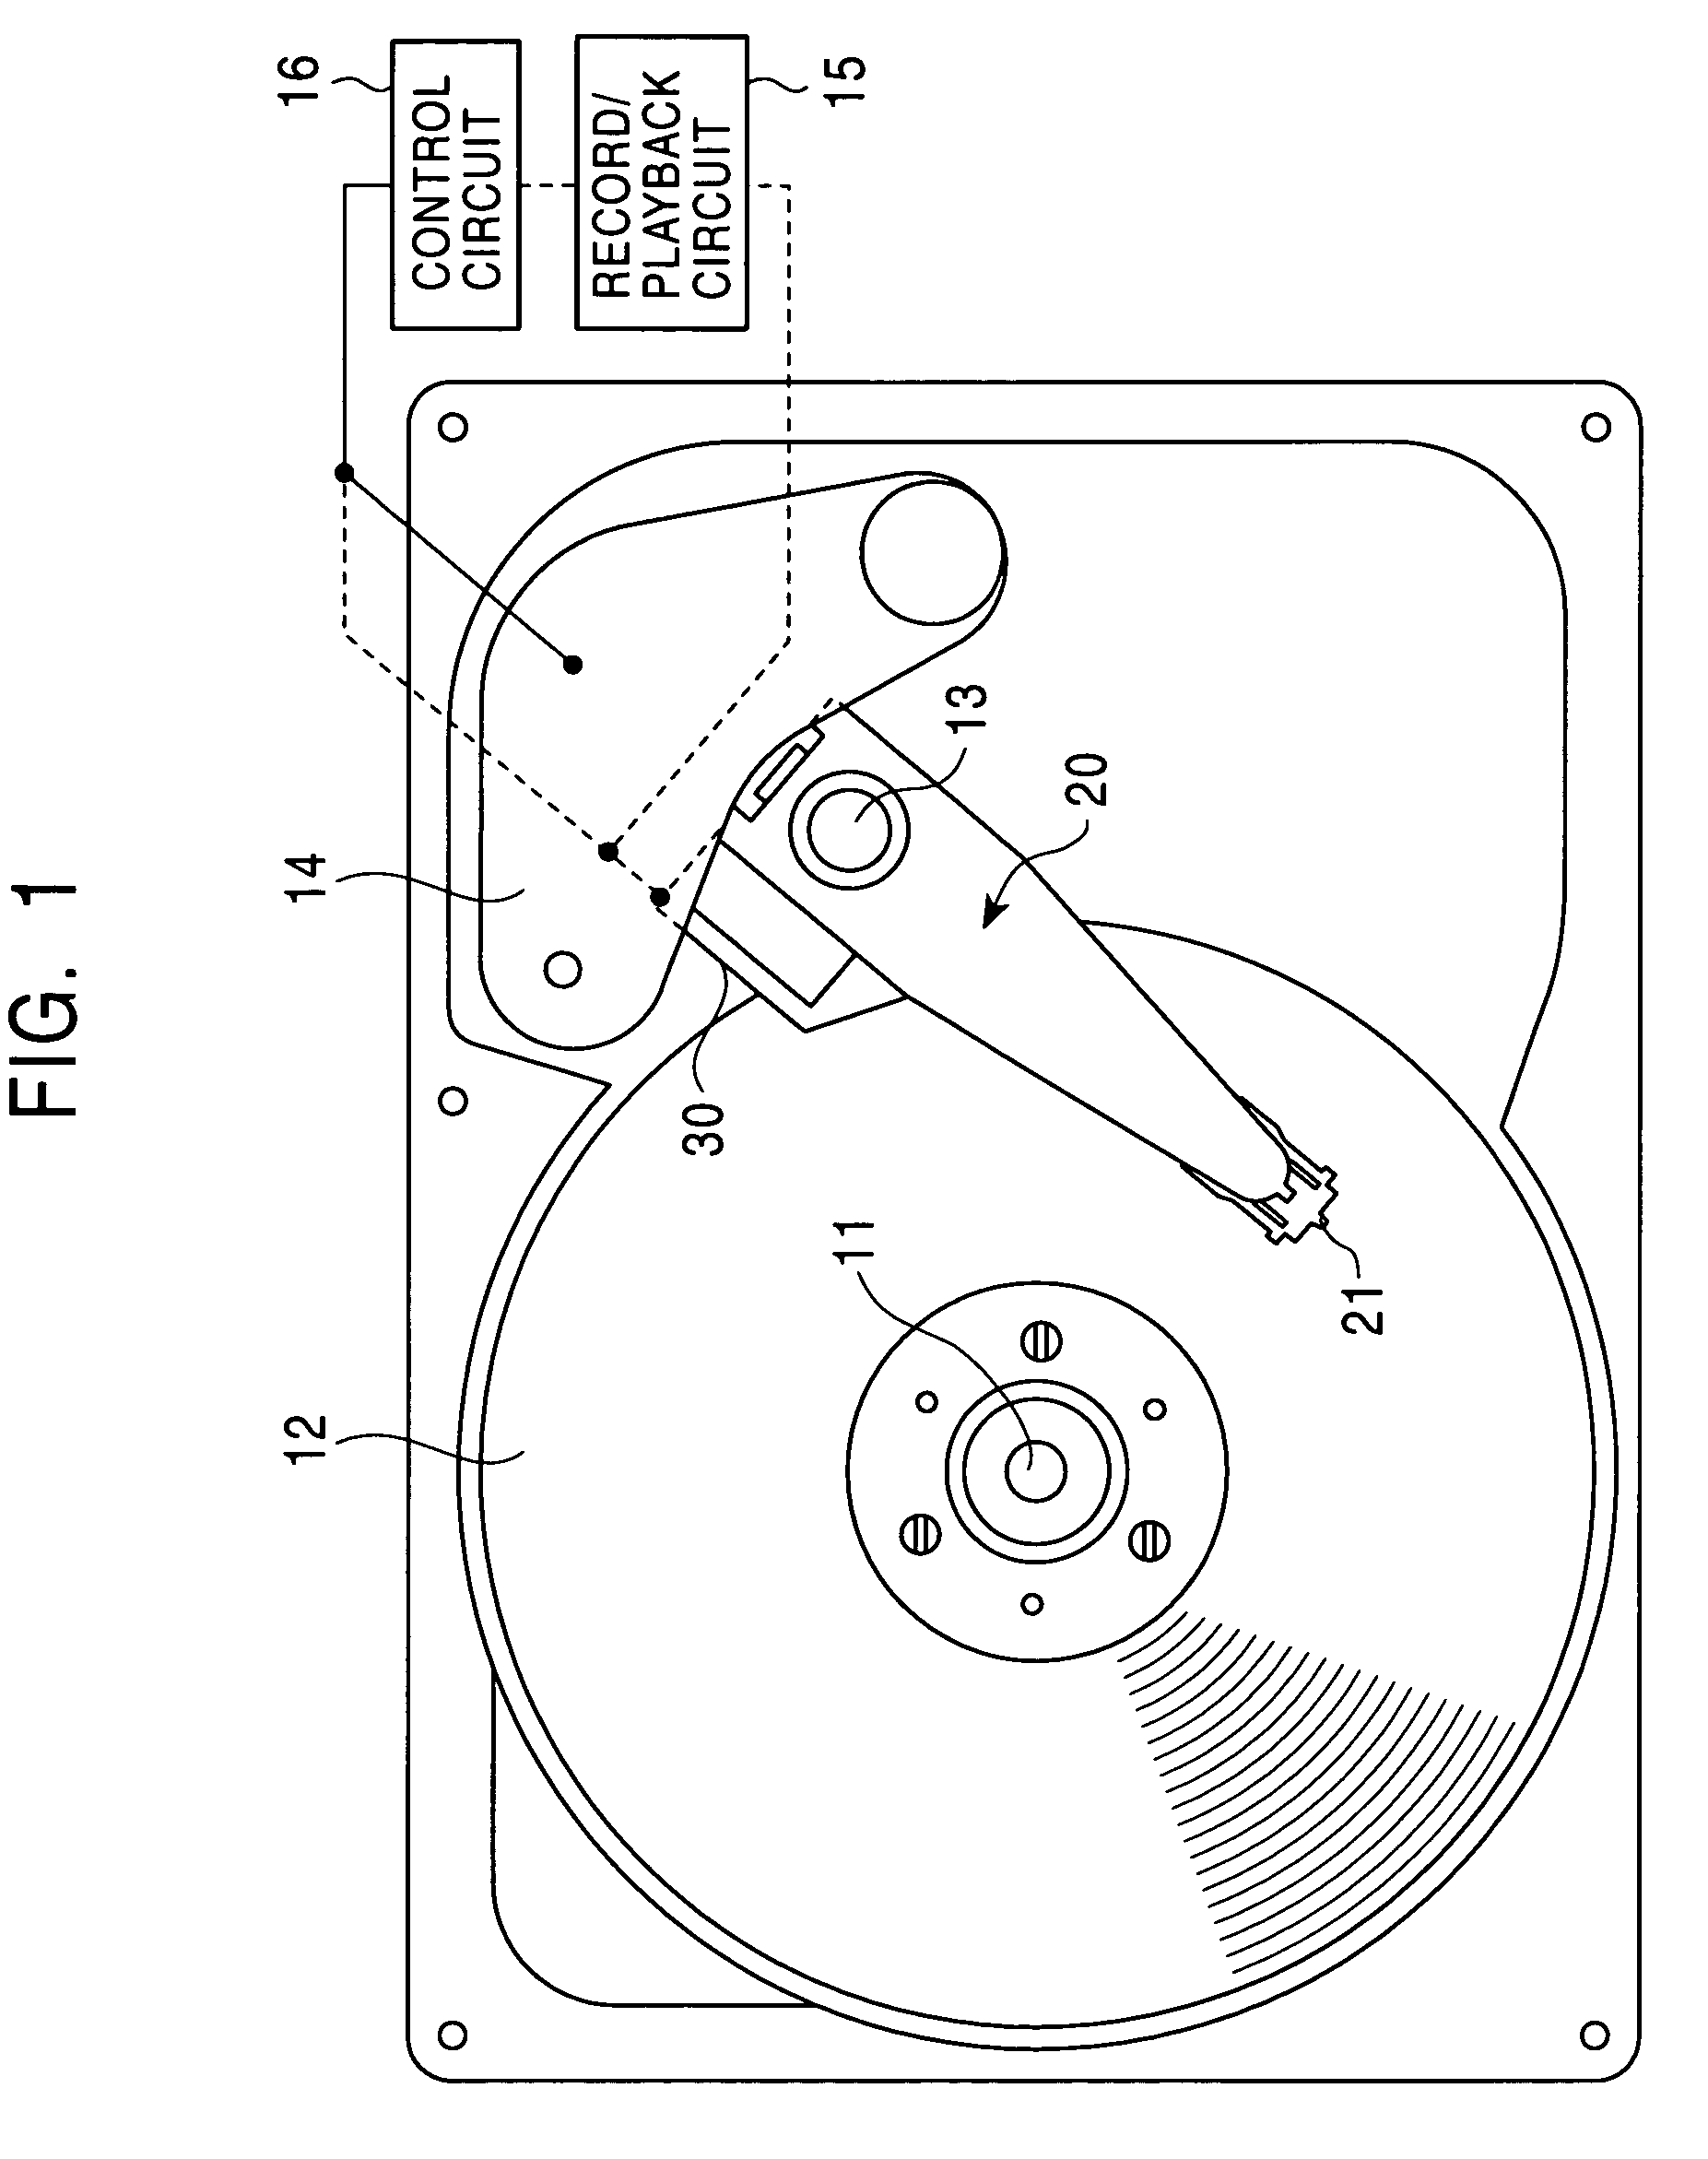 Head gimbal assembly and method for manufacturing the same